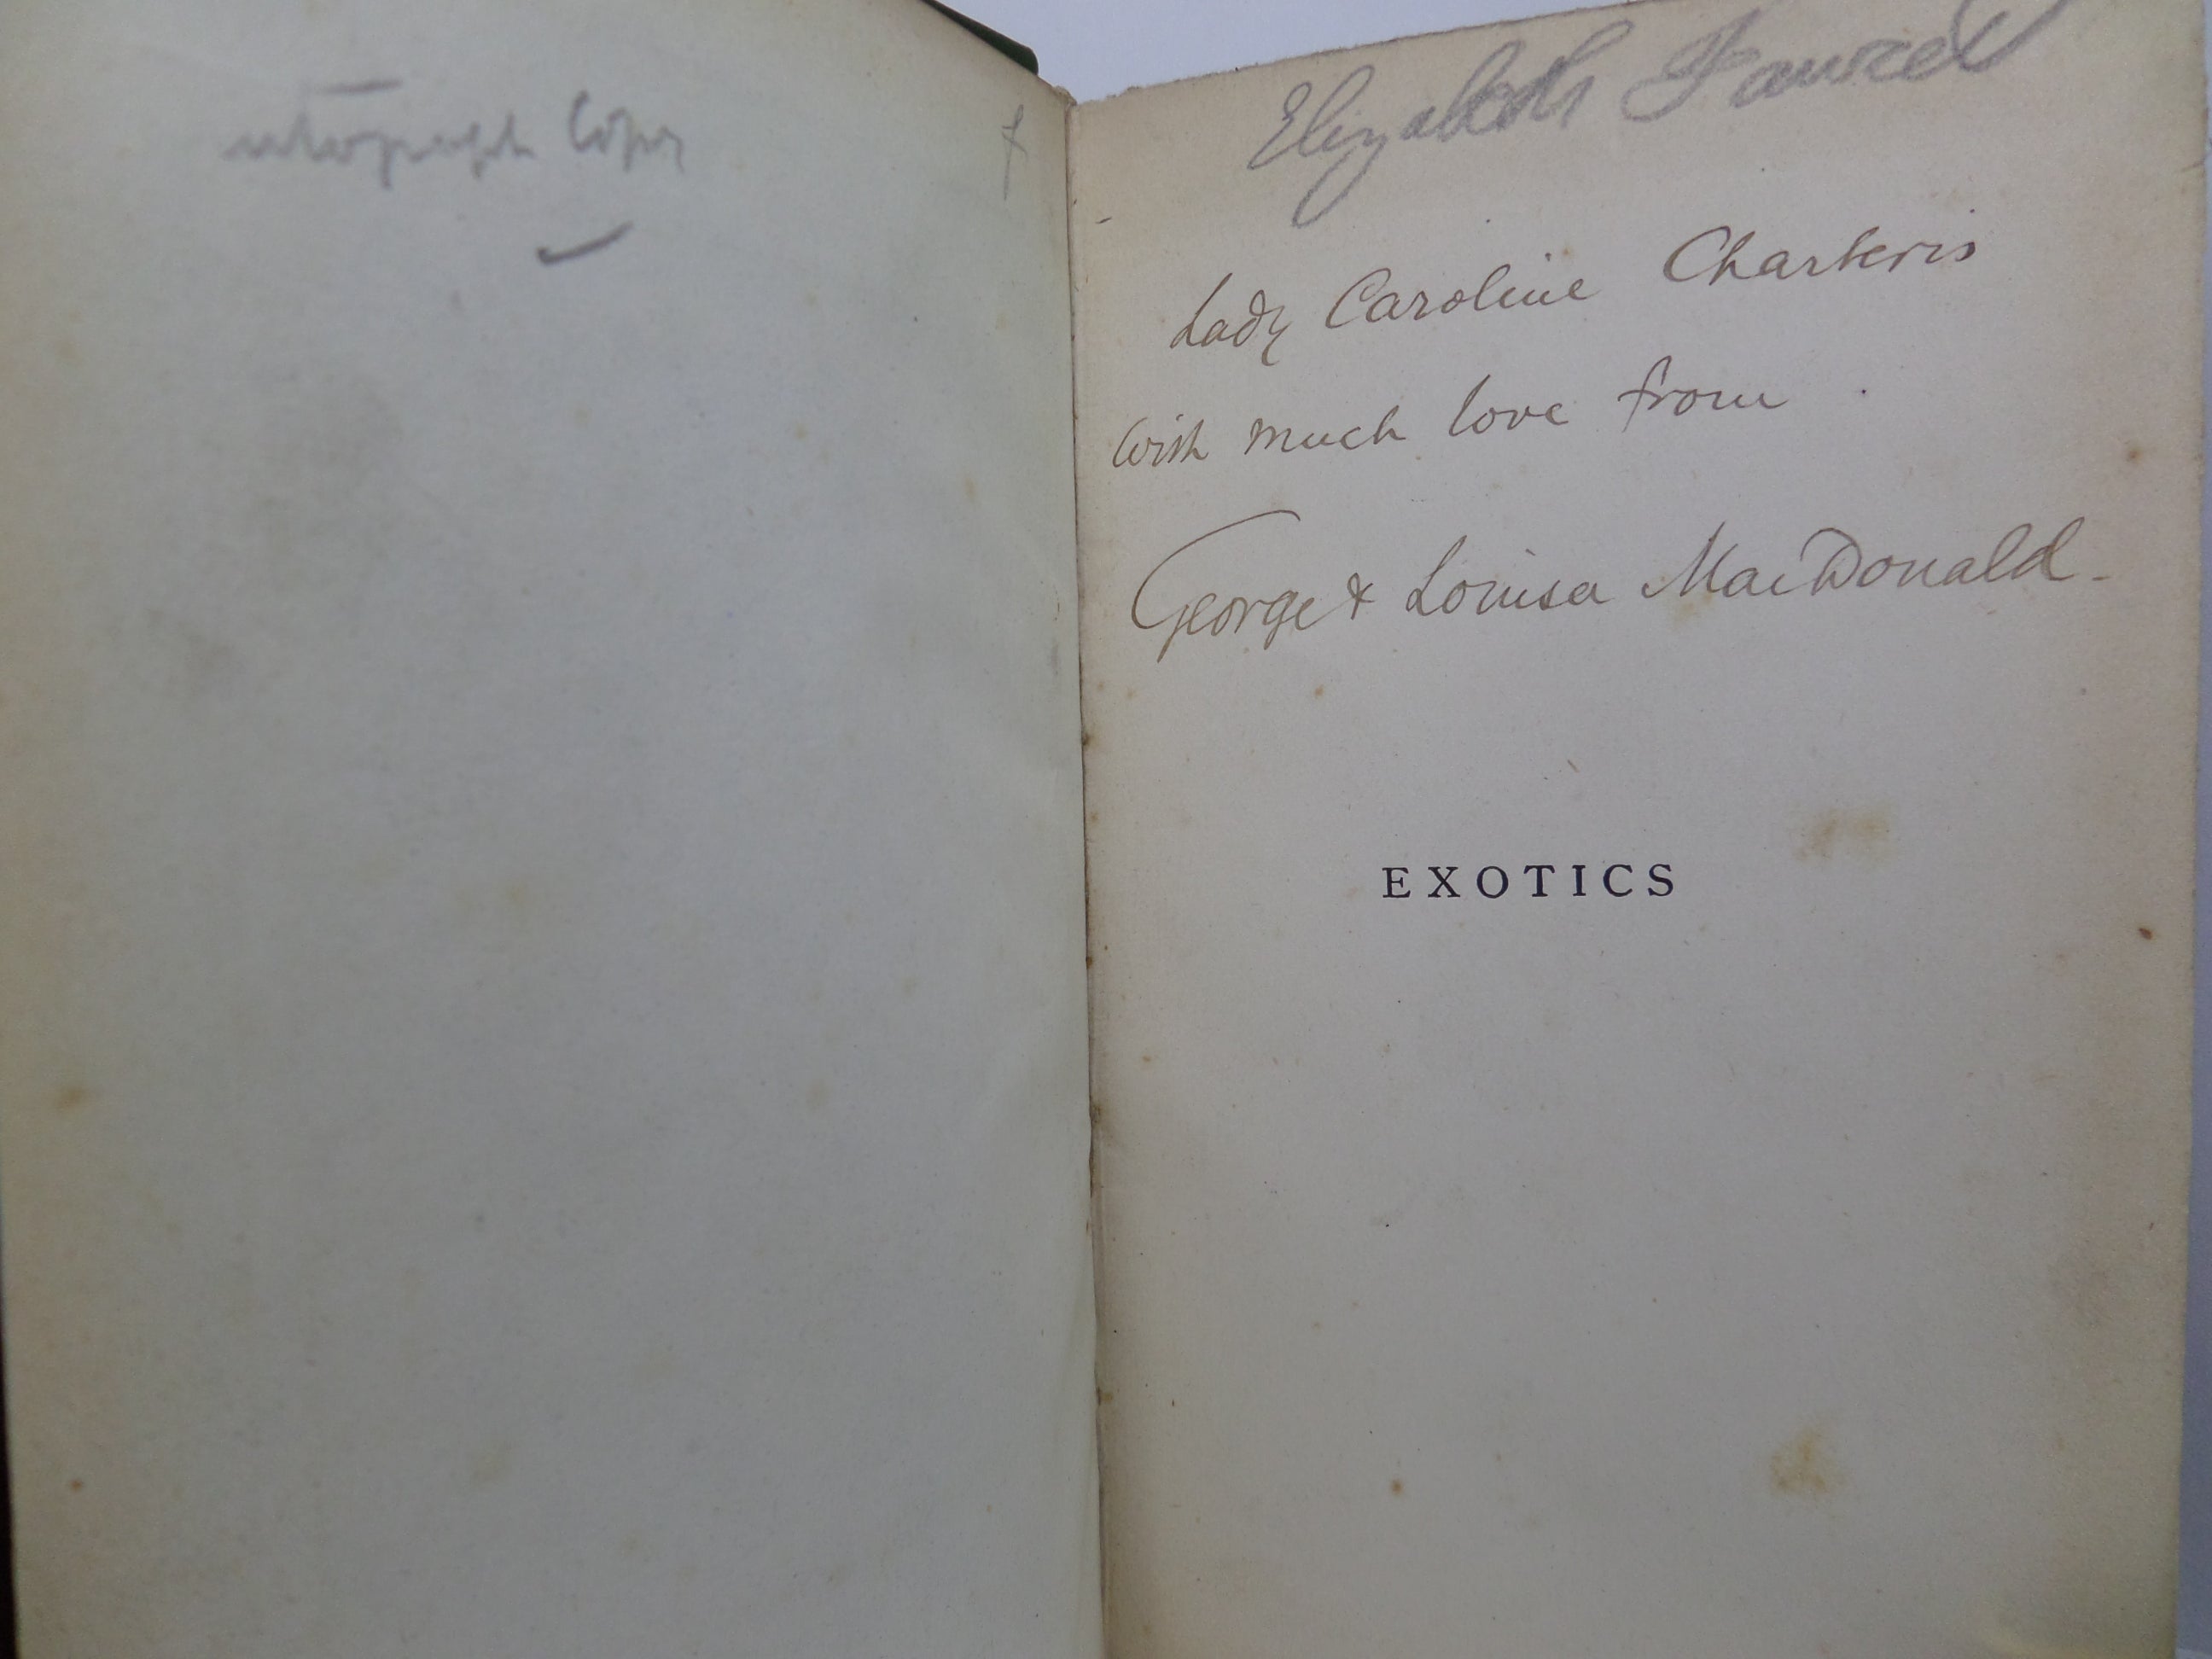 EXOTICS BY GEORGE MACDONALD 1876 FIRST EDITION, AUTHOR PRESENTATION COPY